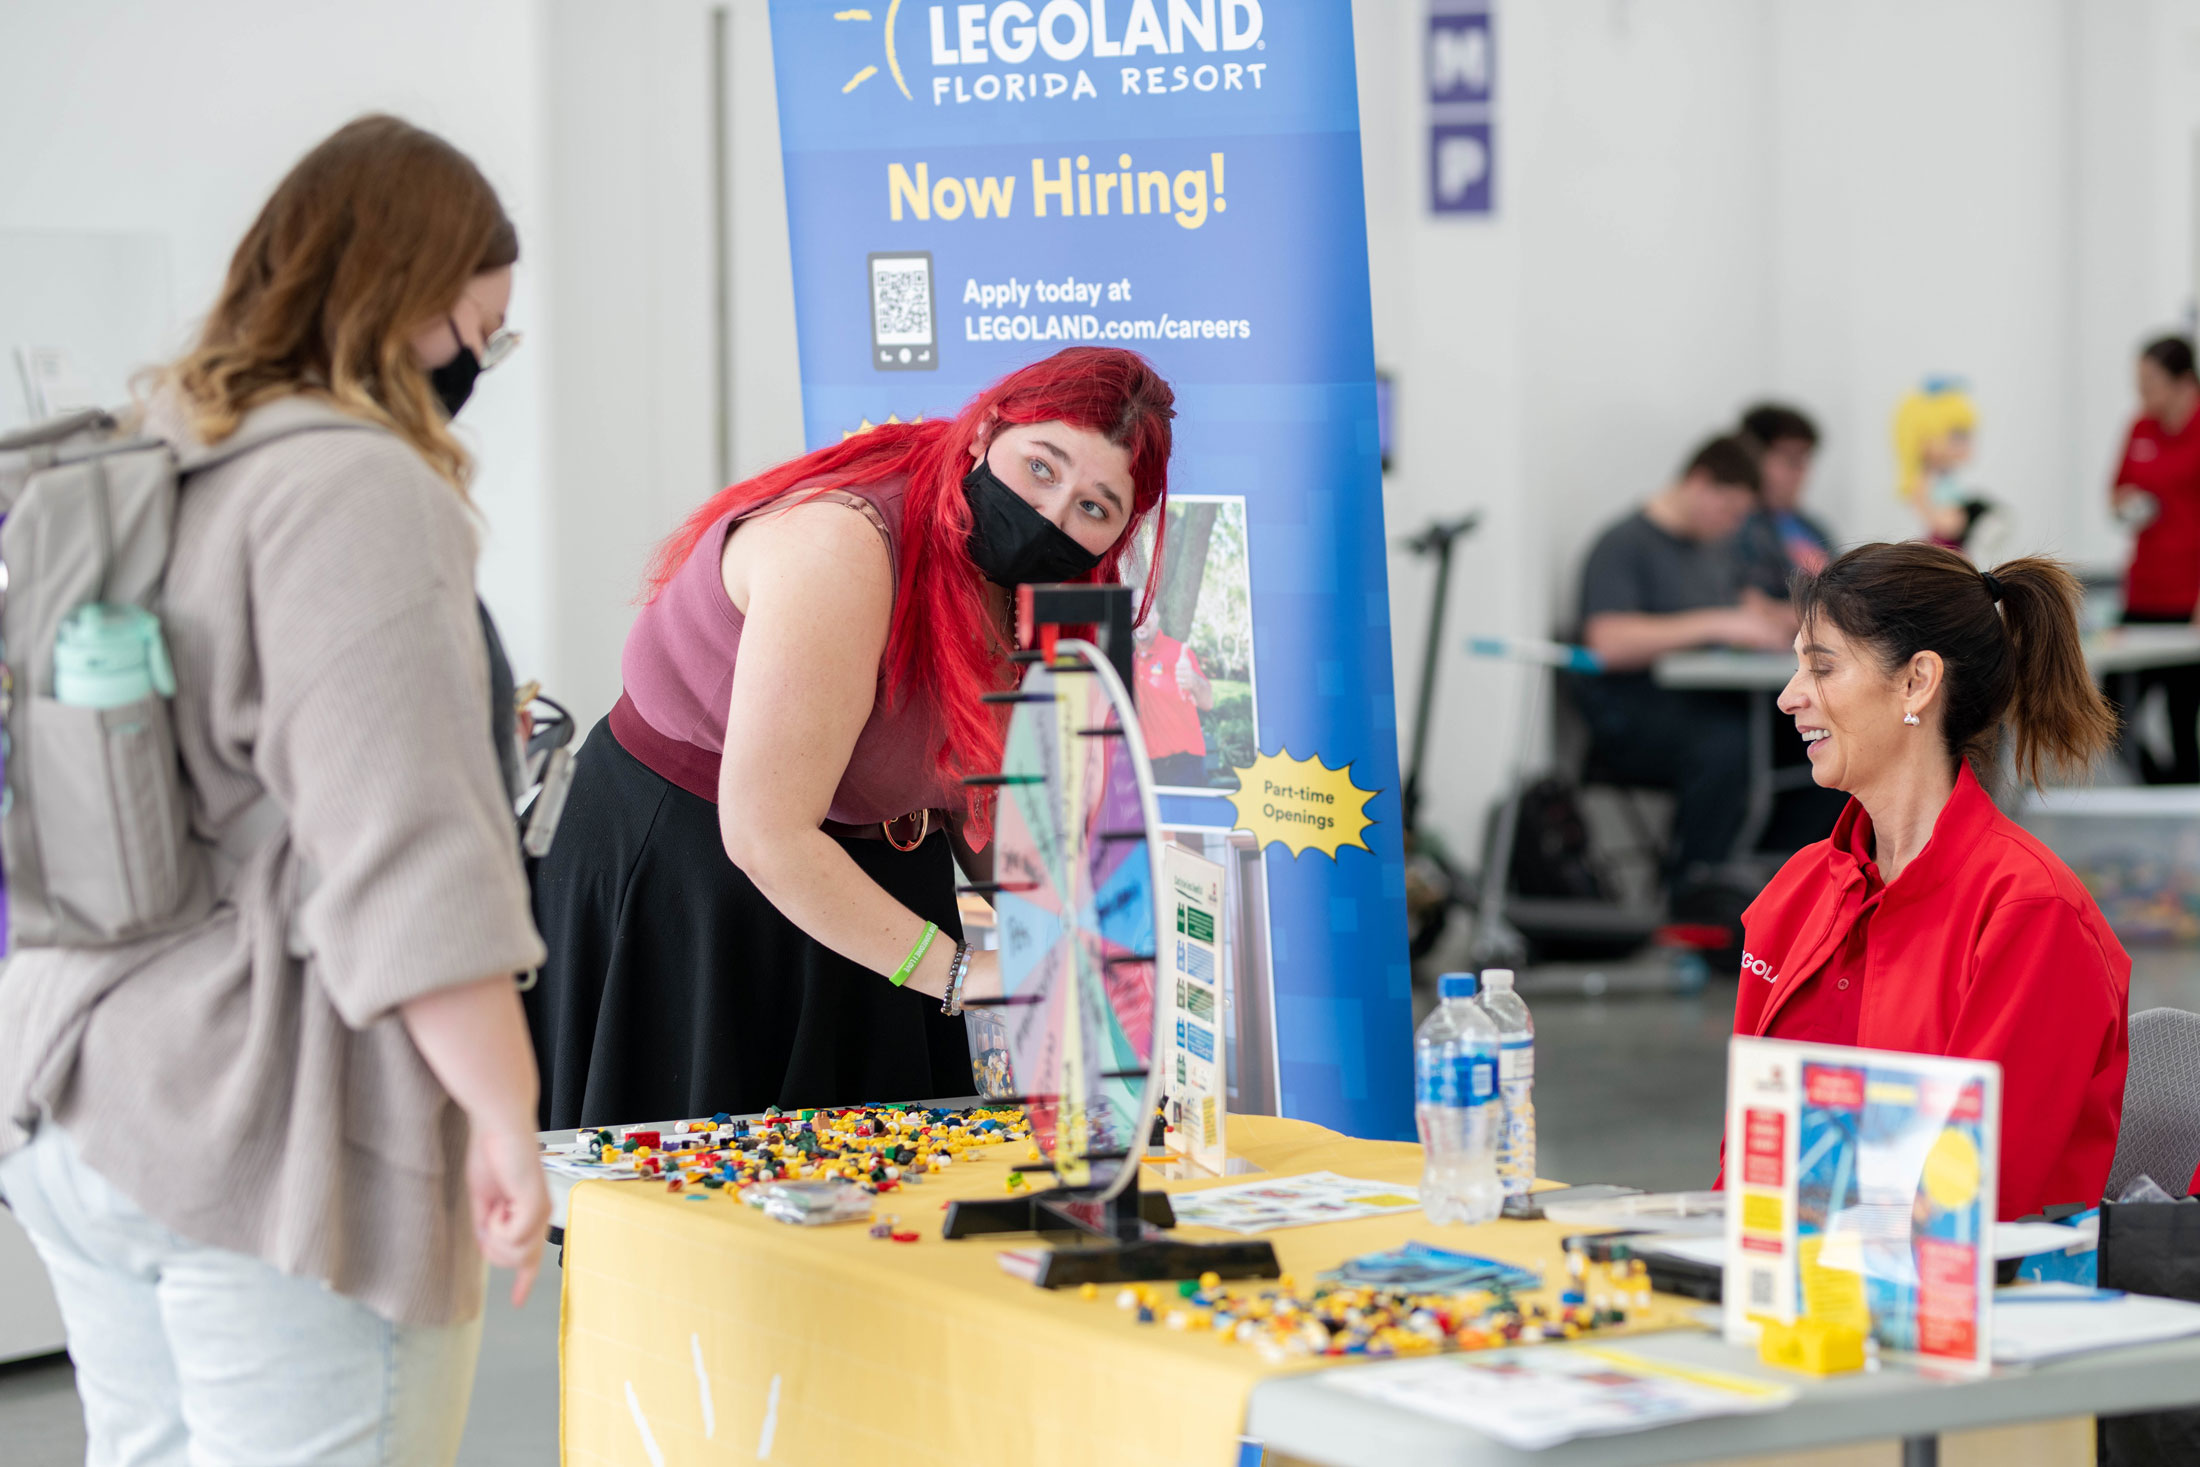 Students build fun, opportunities with Legoland Florida